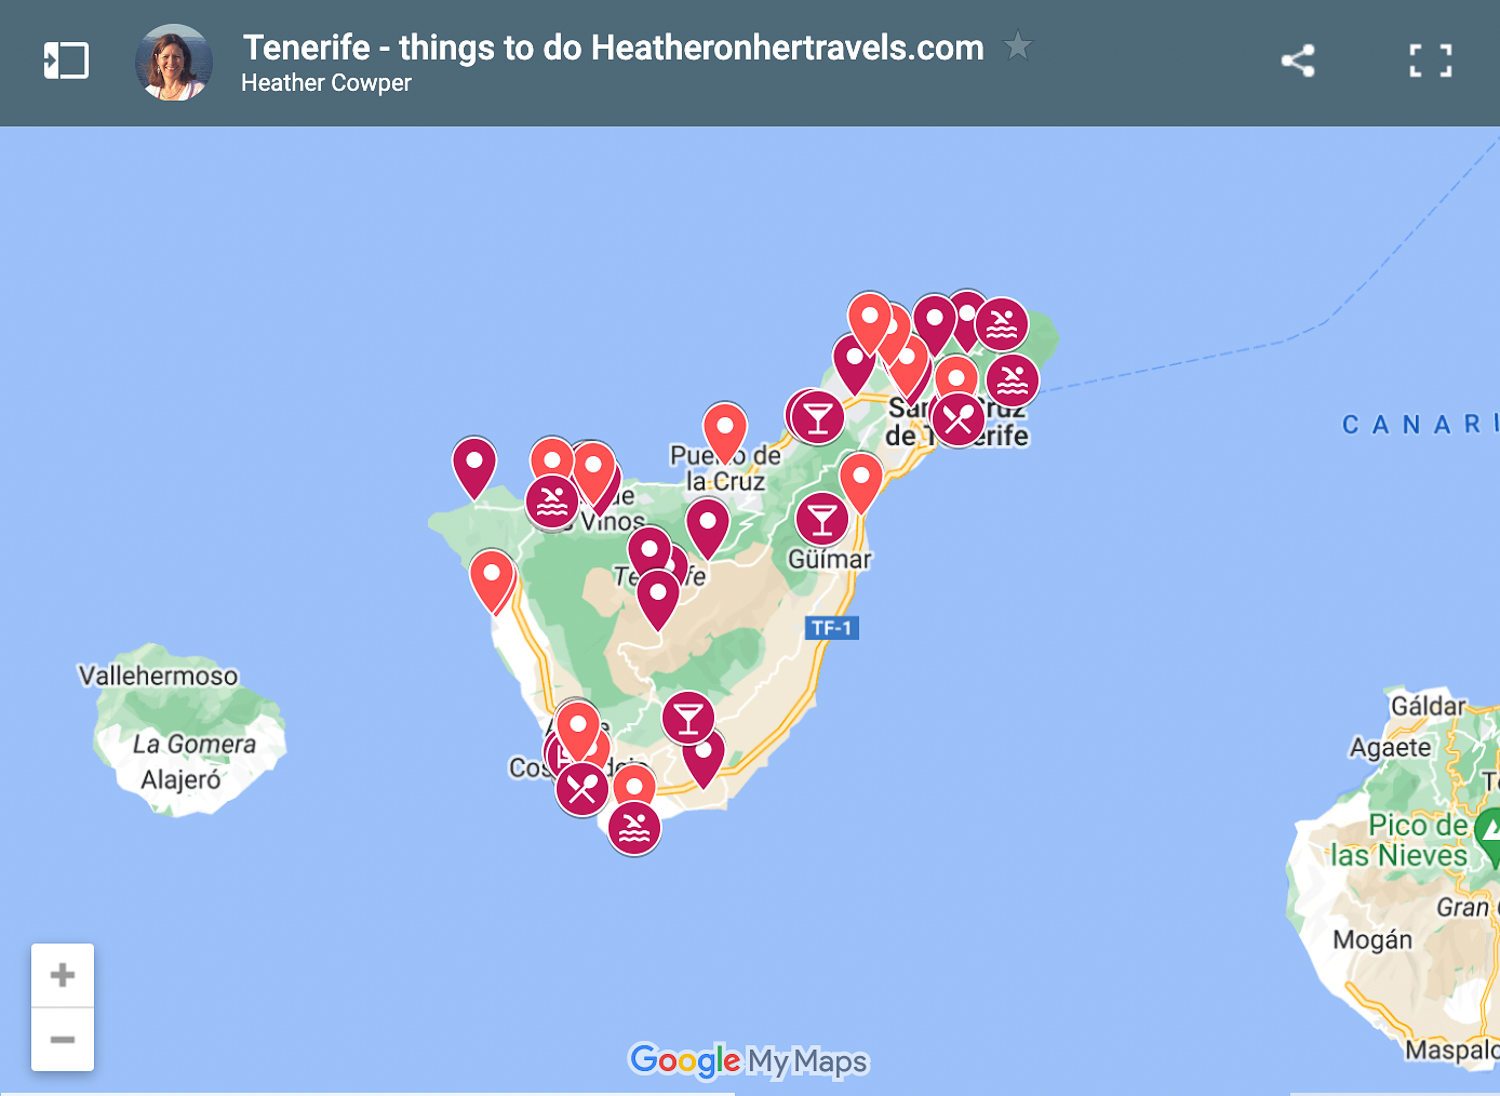 Map of Things to do in Tenerife by Heatheronhertravels.com